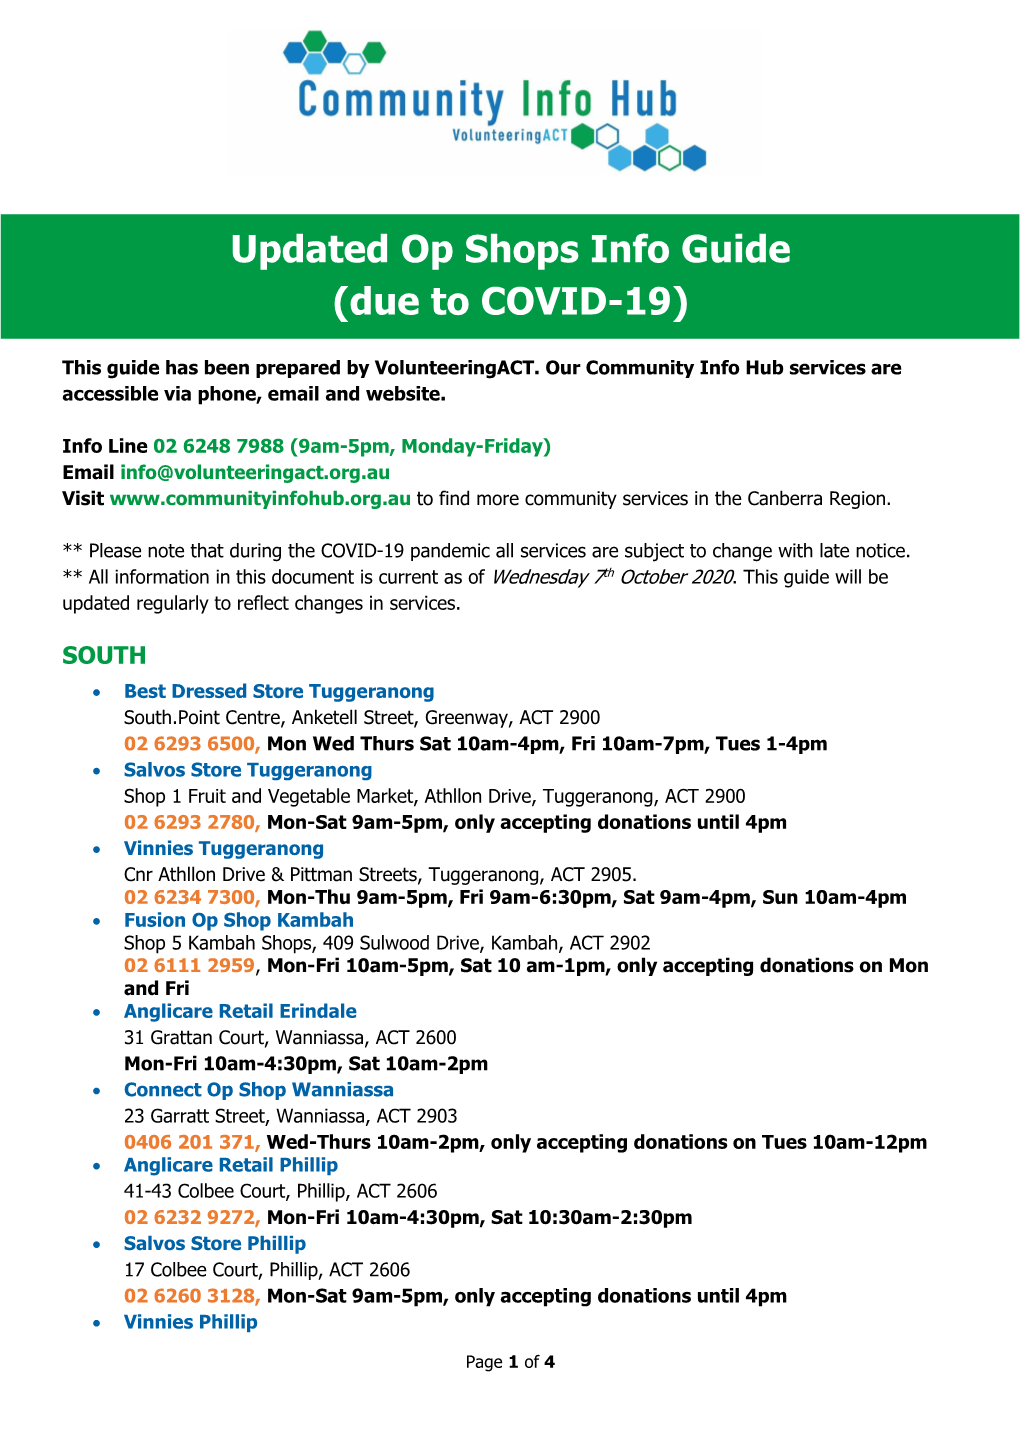 Updated Op Shops Info Guide (Due to COVID-19)